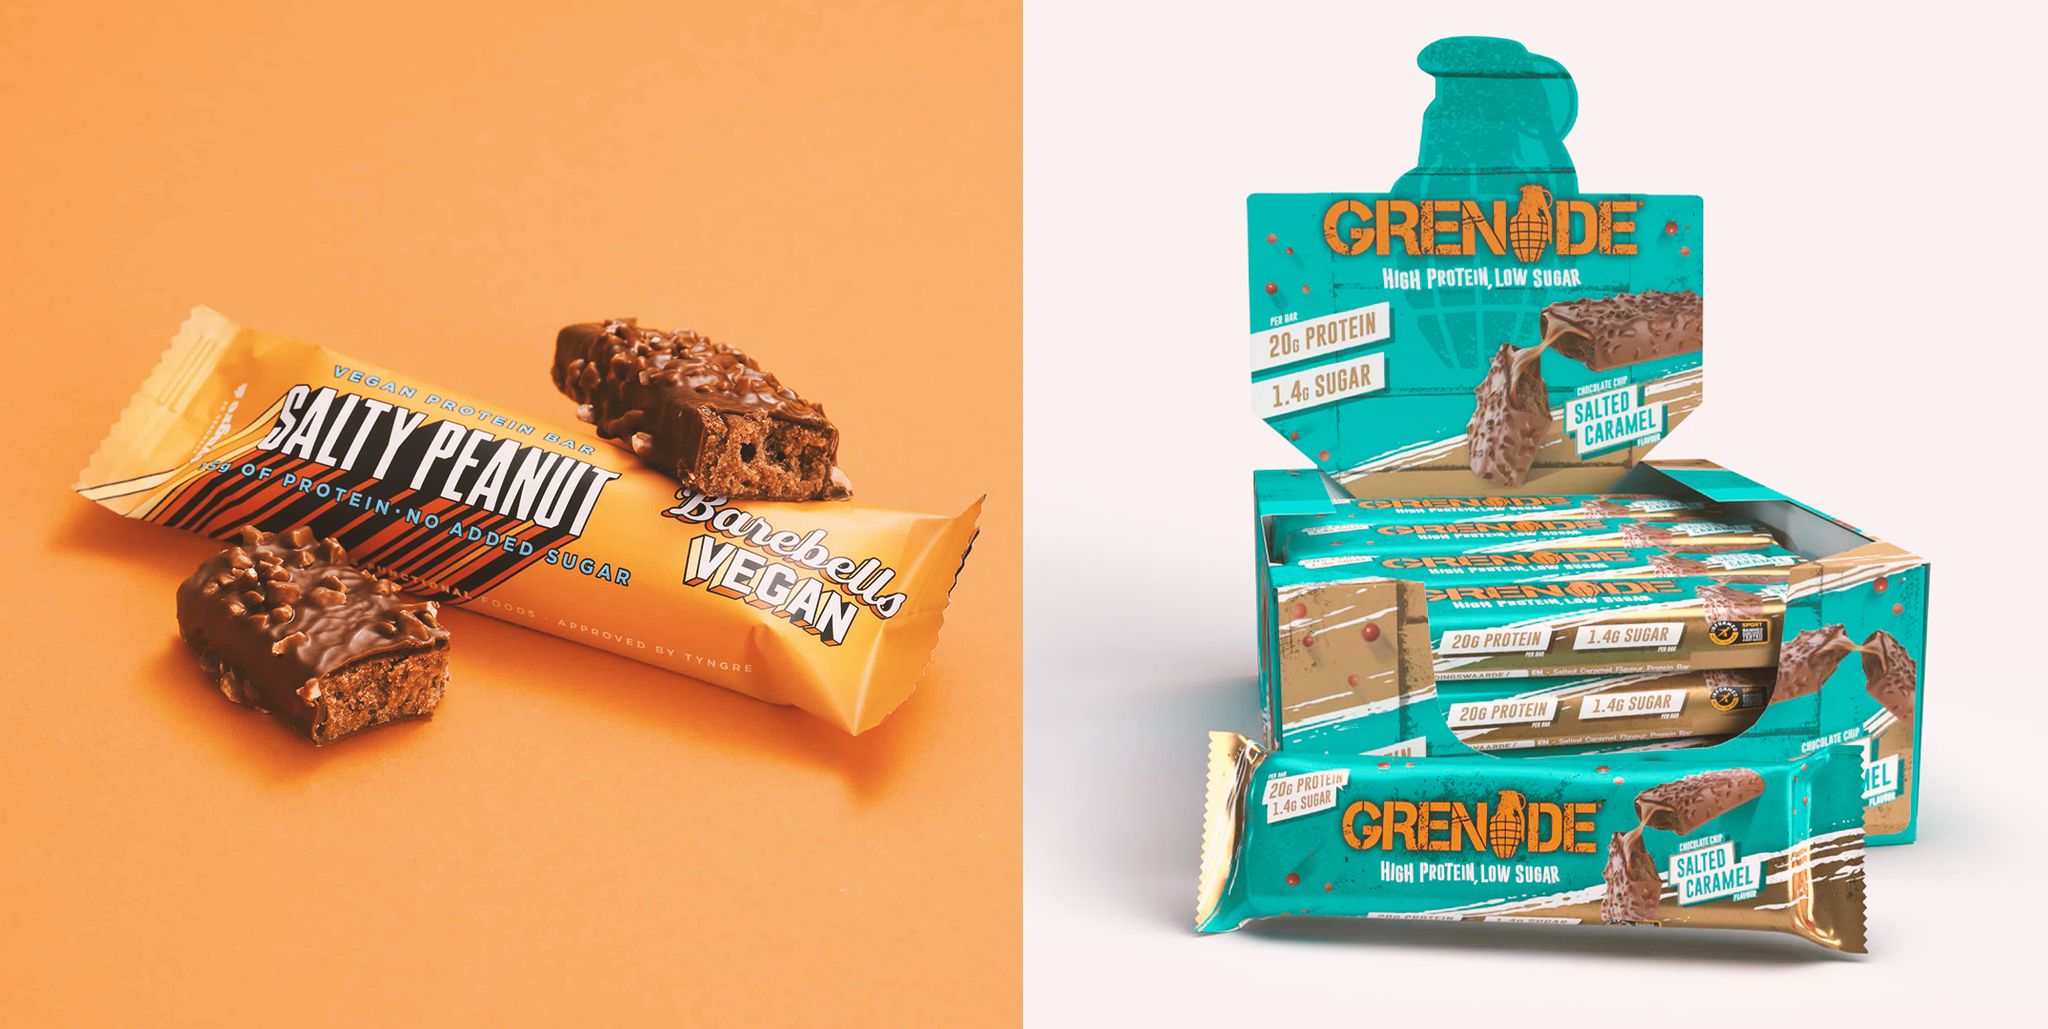 two different protein bars one from grenade and another from barebells